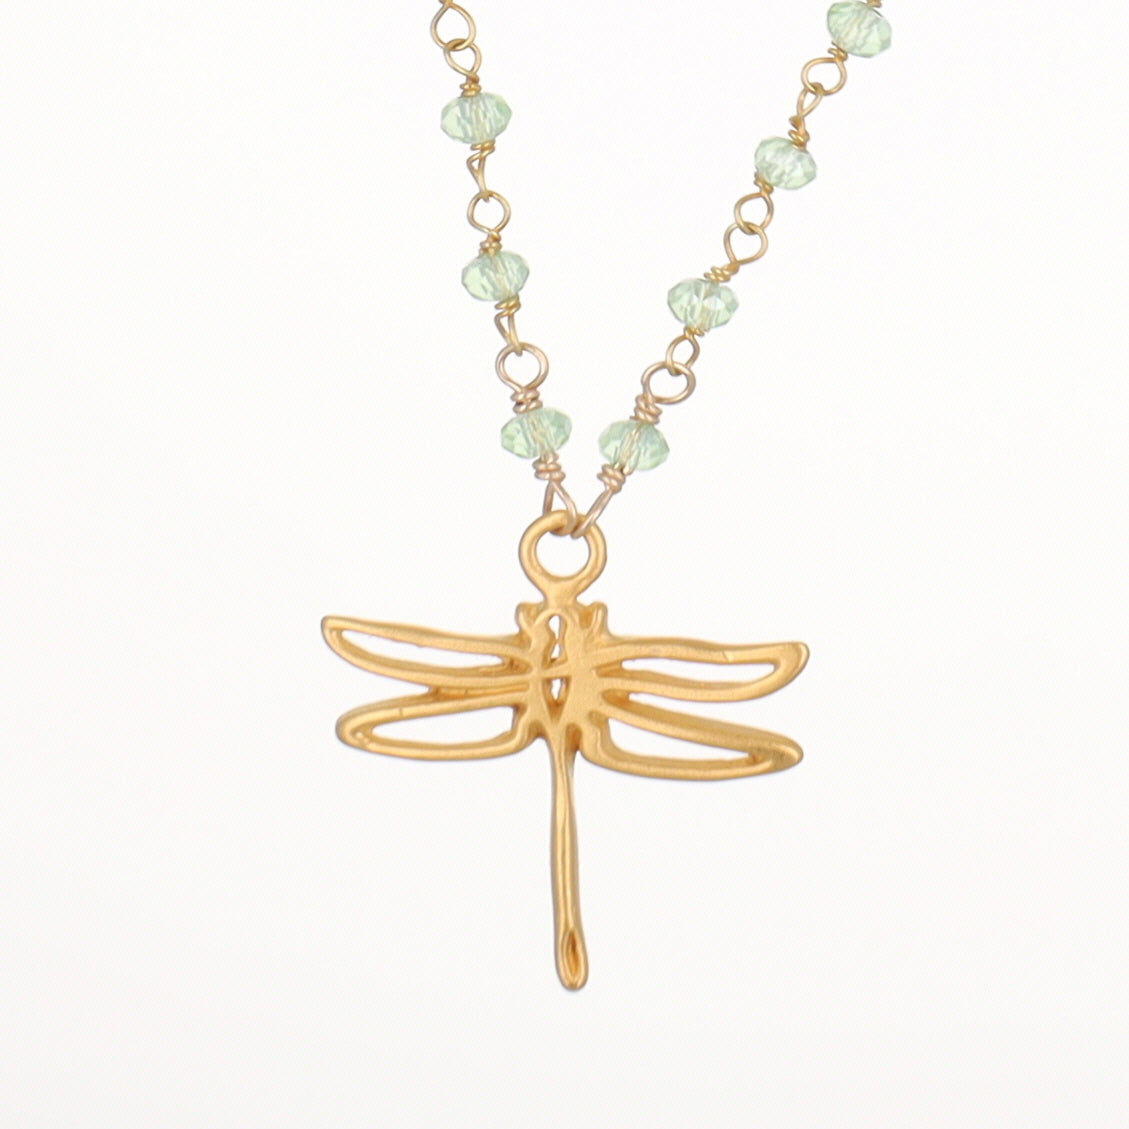 Green Sapphire Dragonfly Charm Necklace